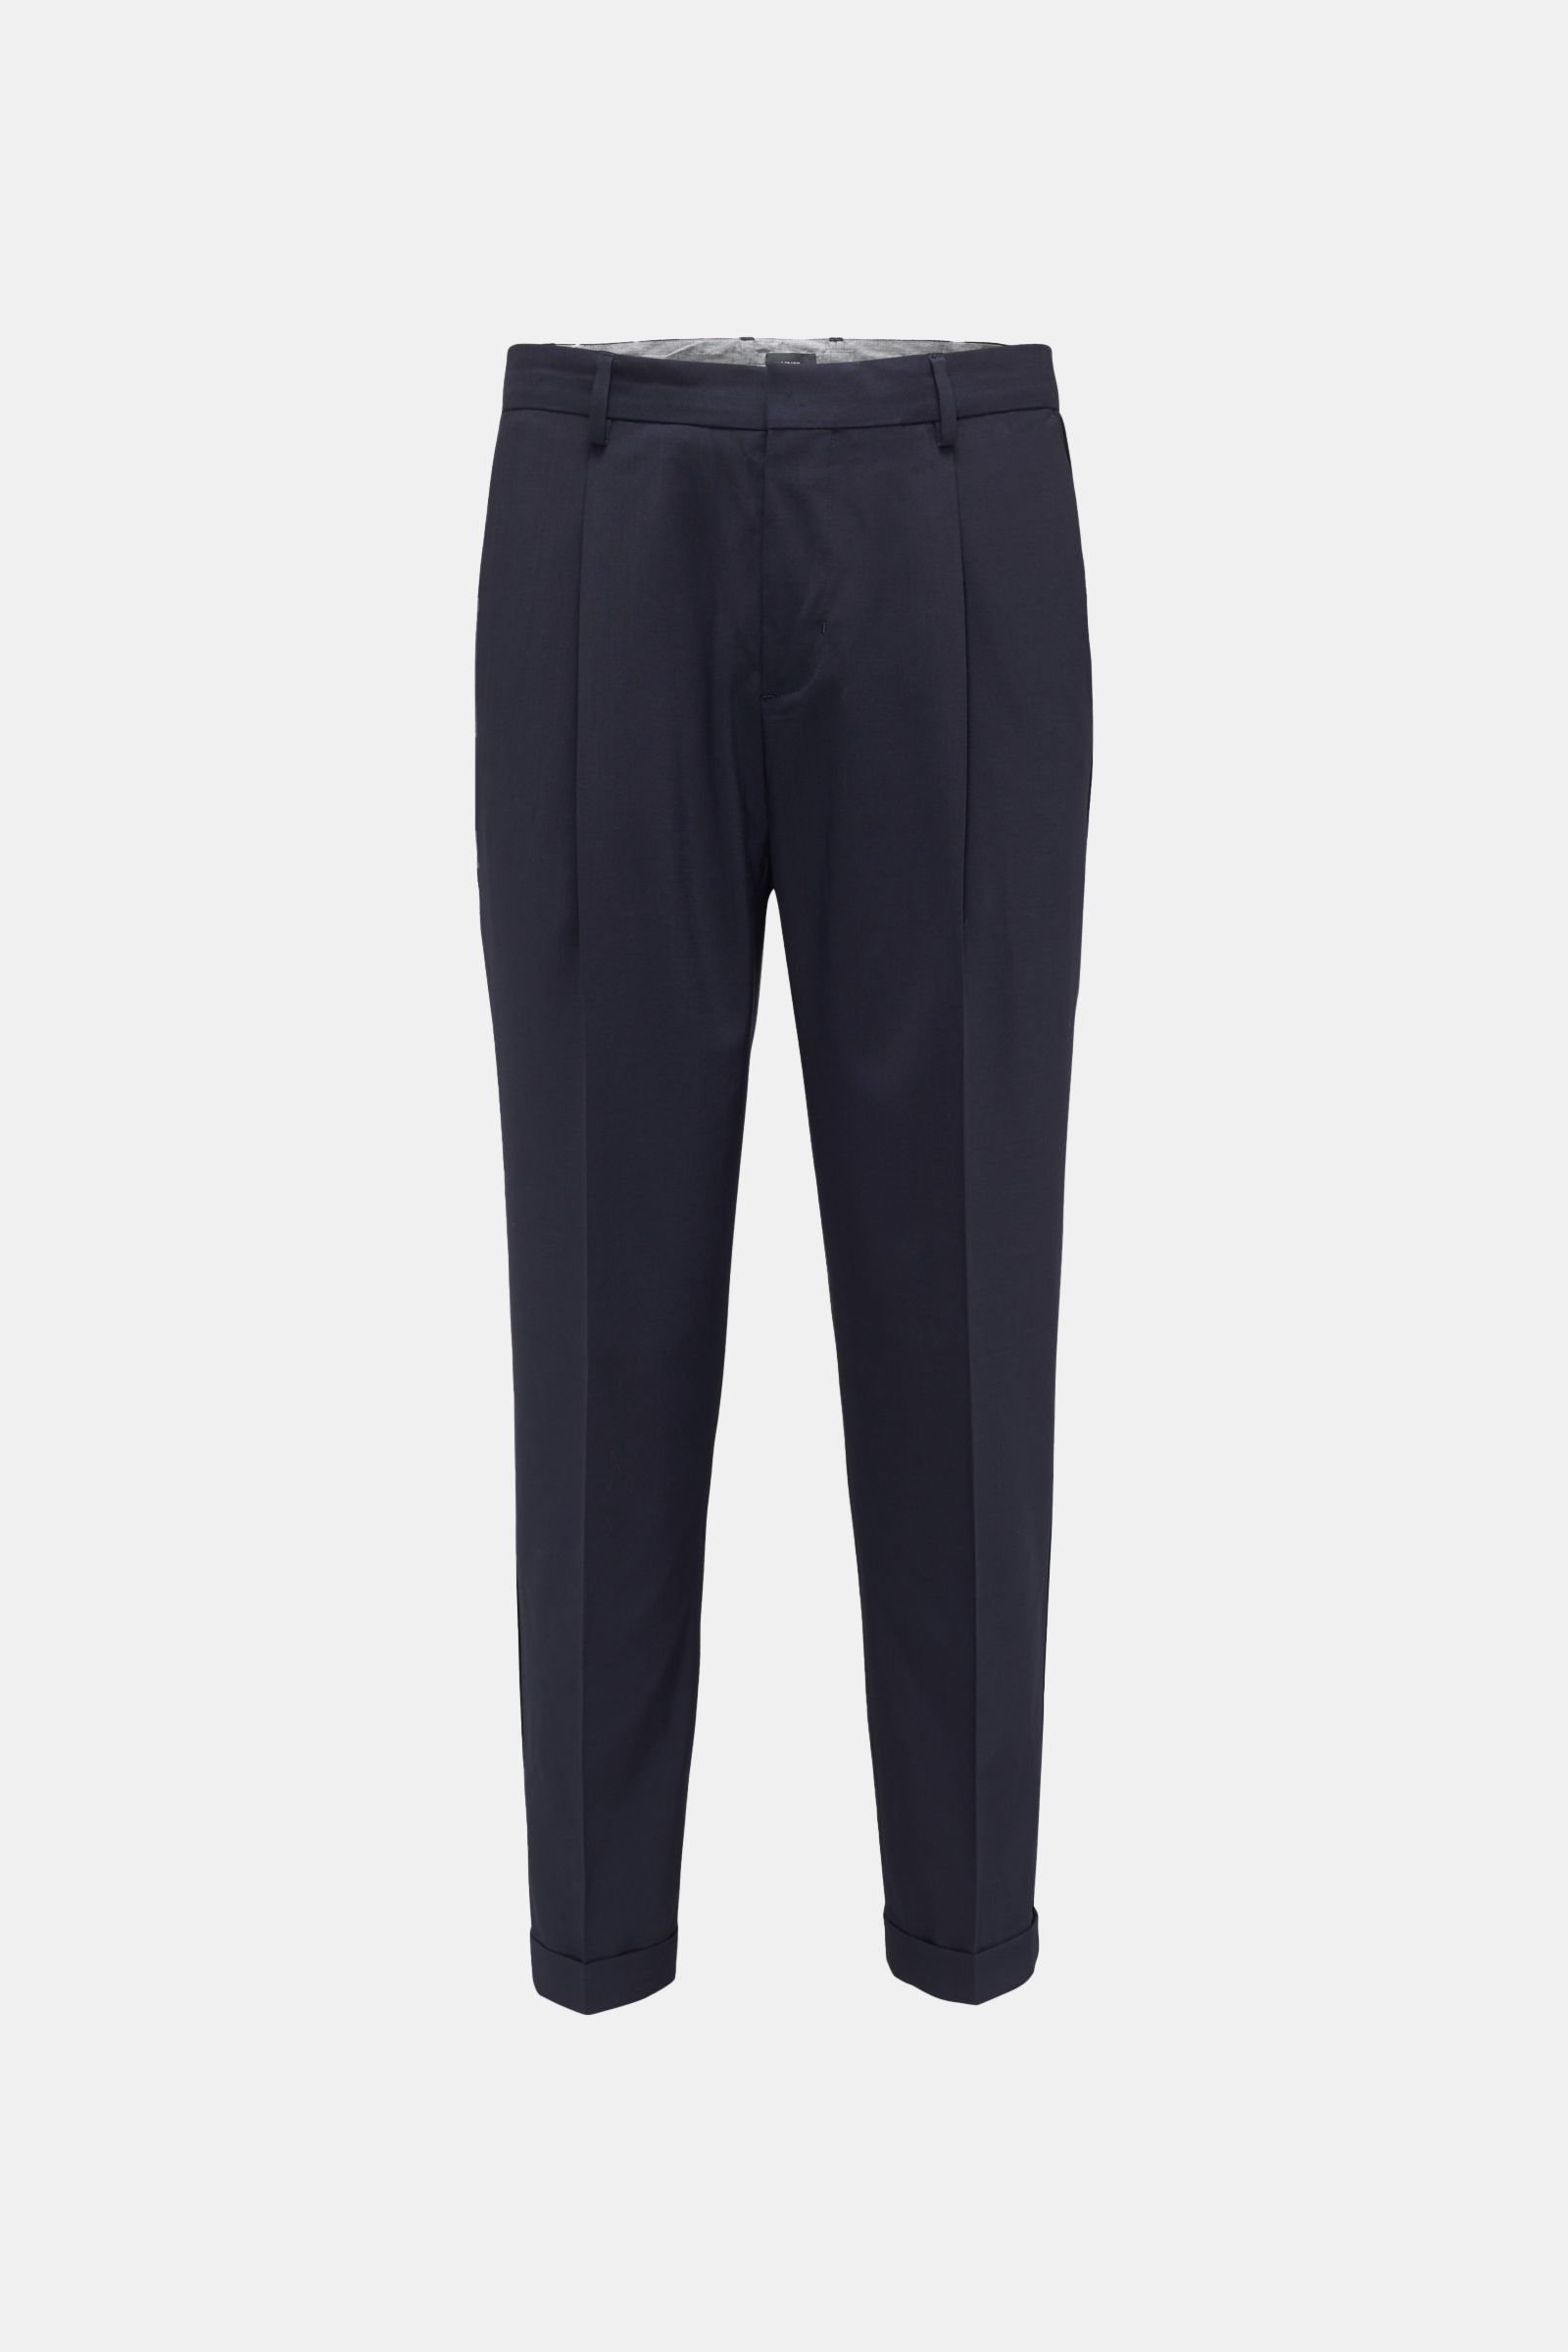 Wool trousers navy